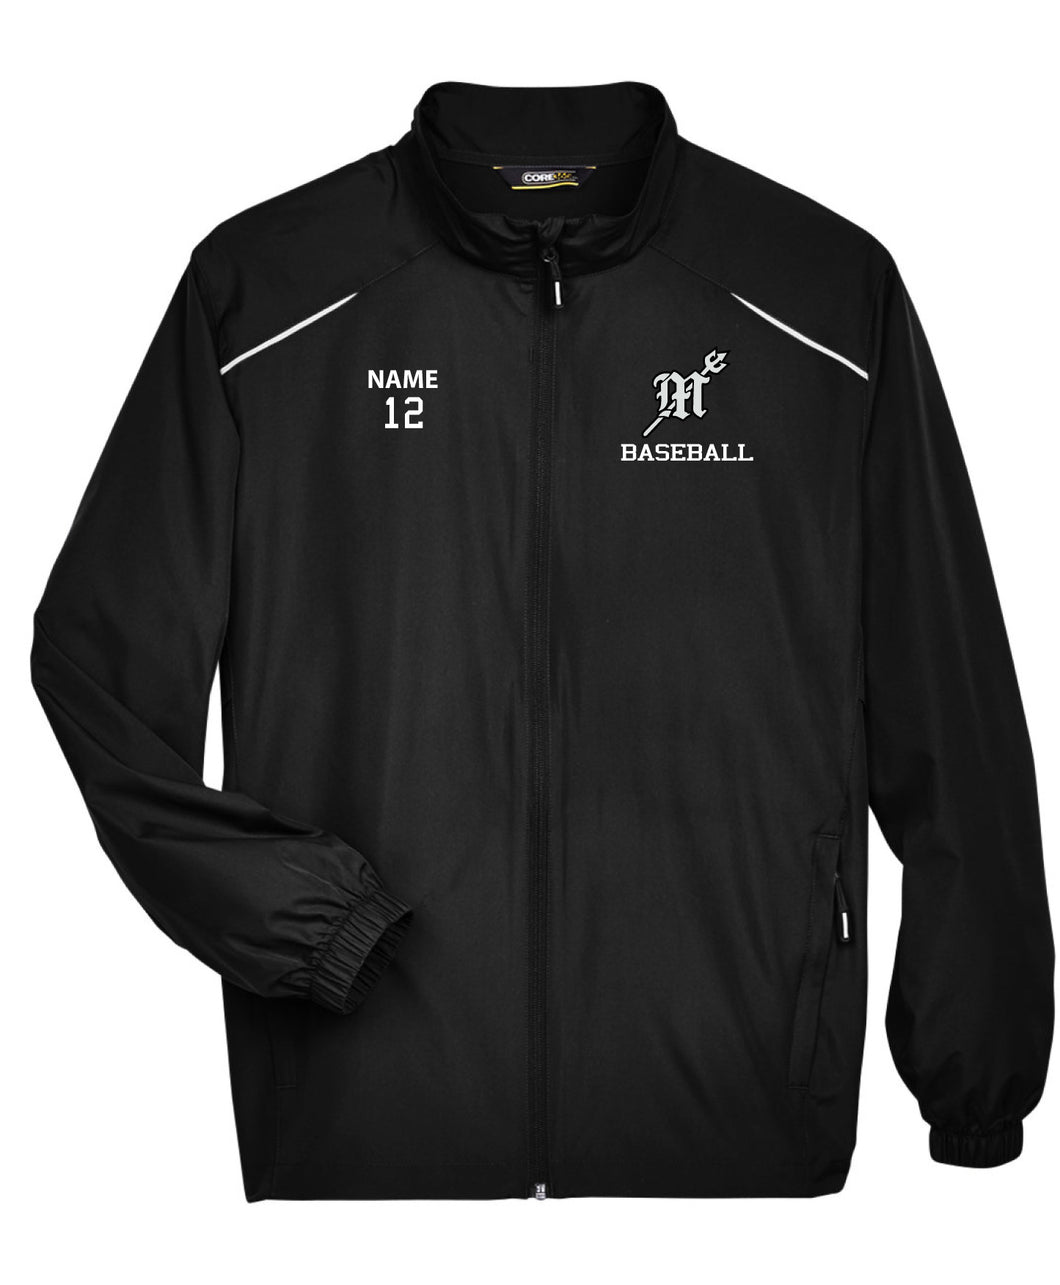 Full Zip Wind Jacket with reflective trim (mens cut)